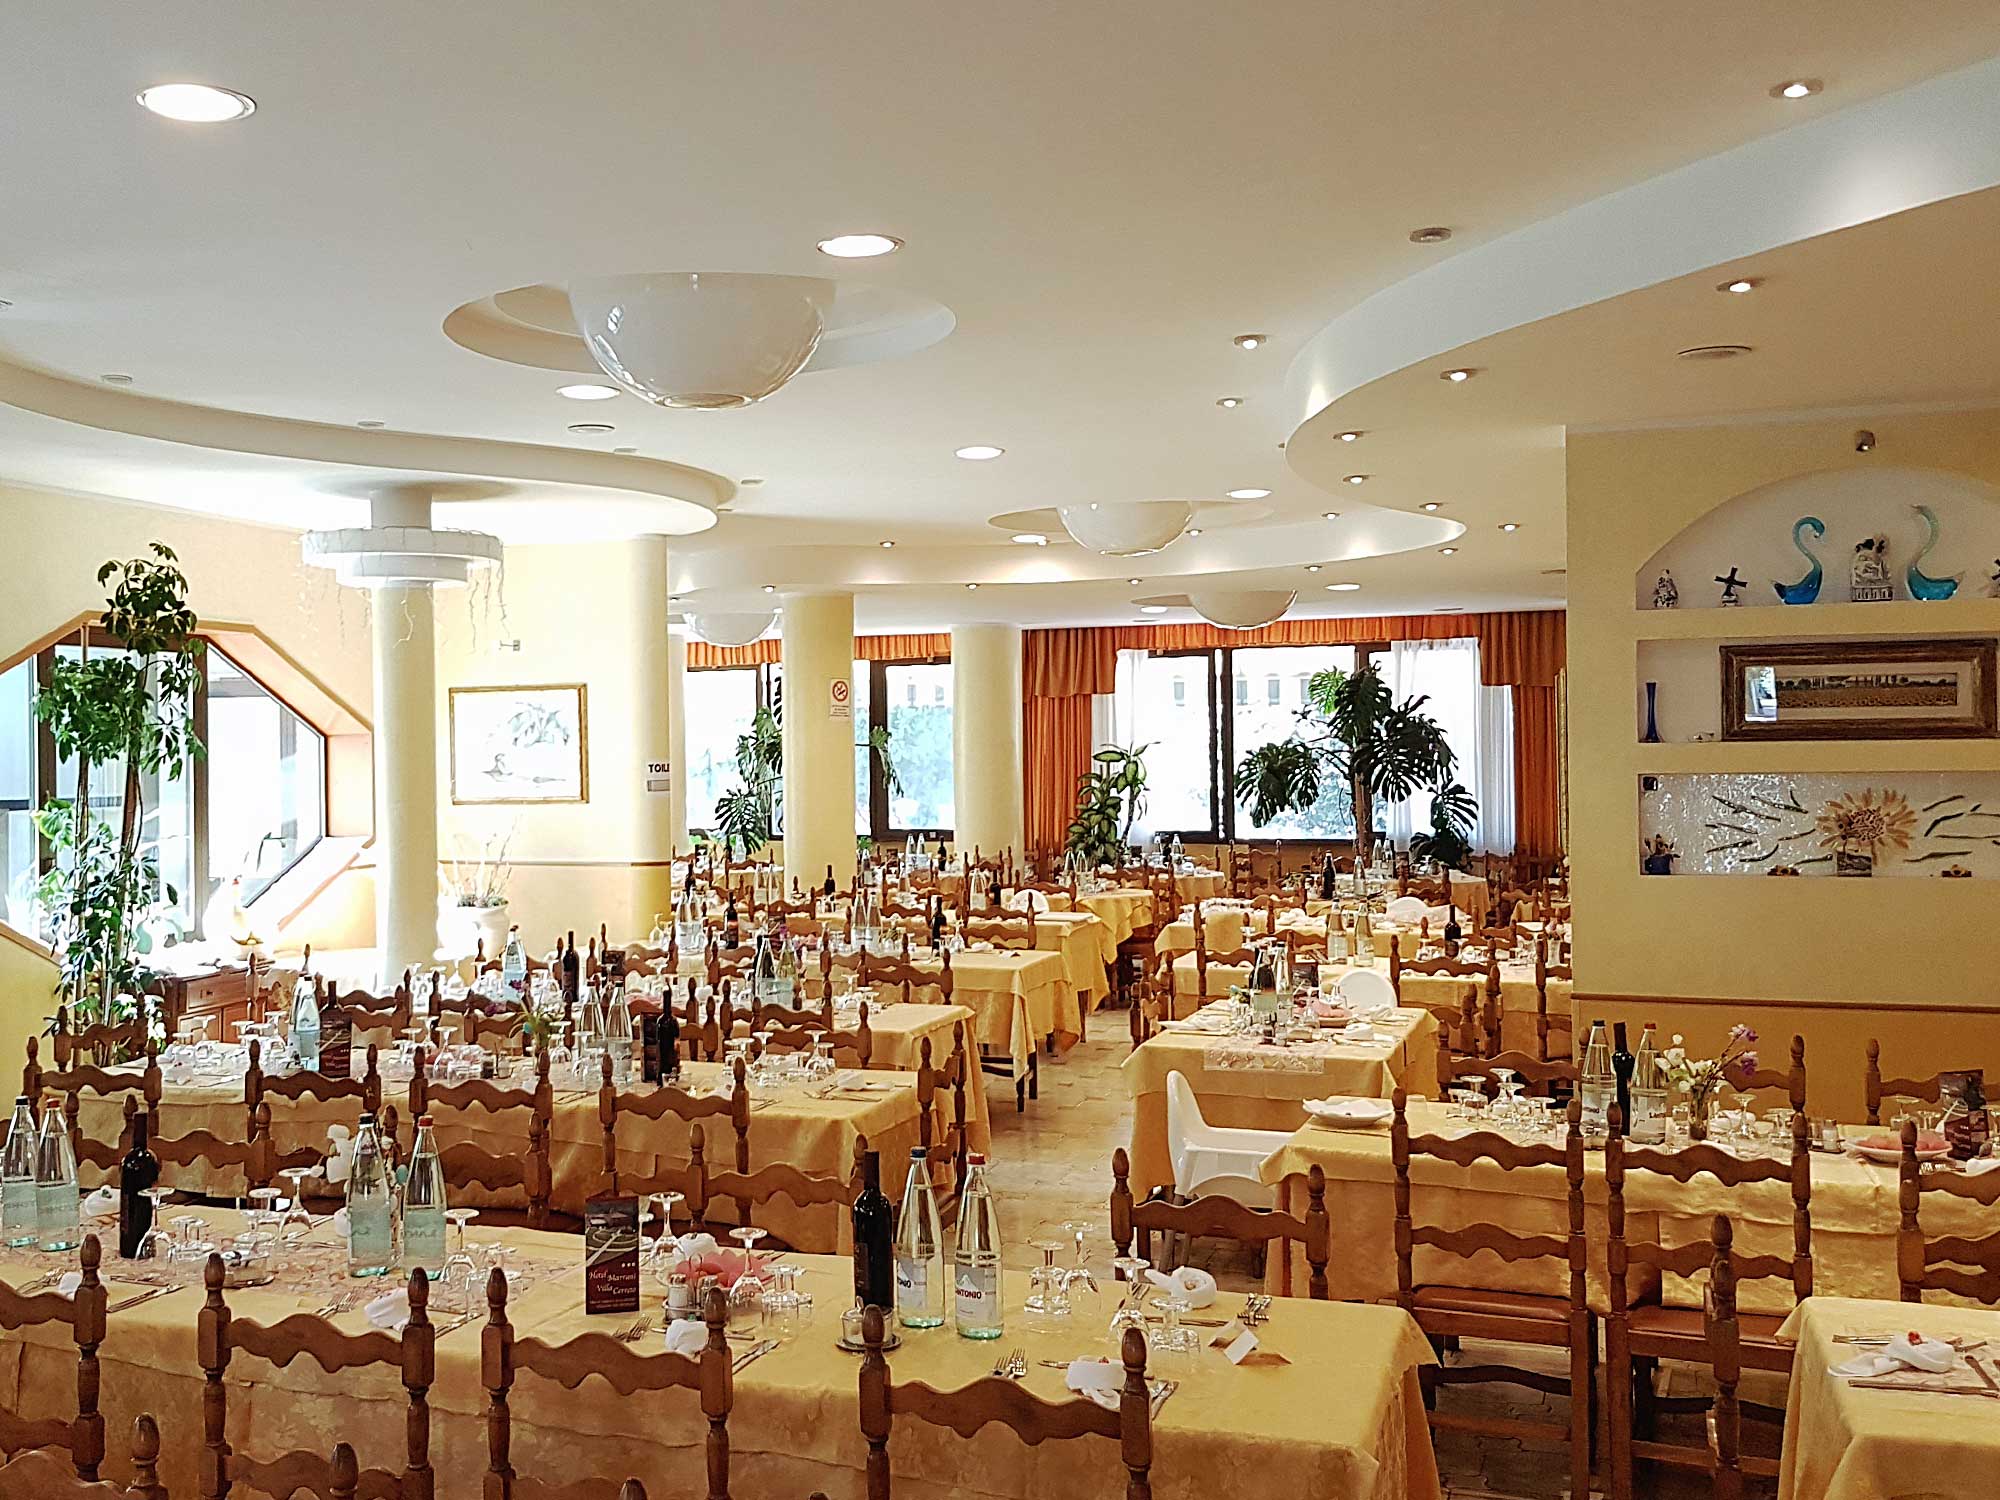 The Restaurant, for banquets, ceremonies and to enjoy traditional Tuscan dishes